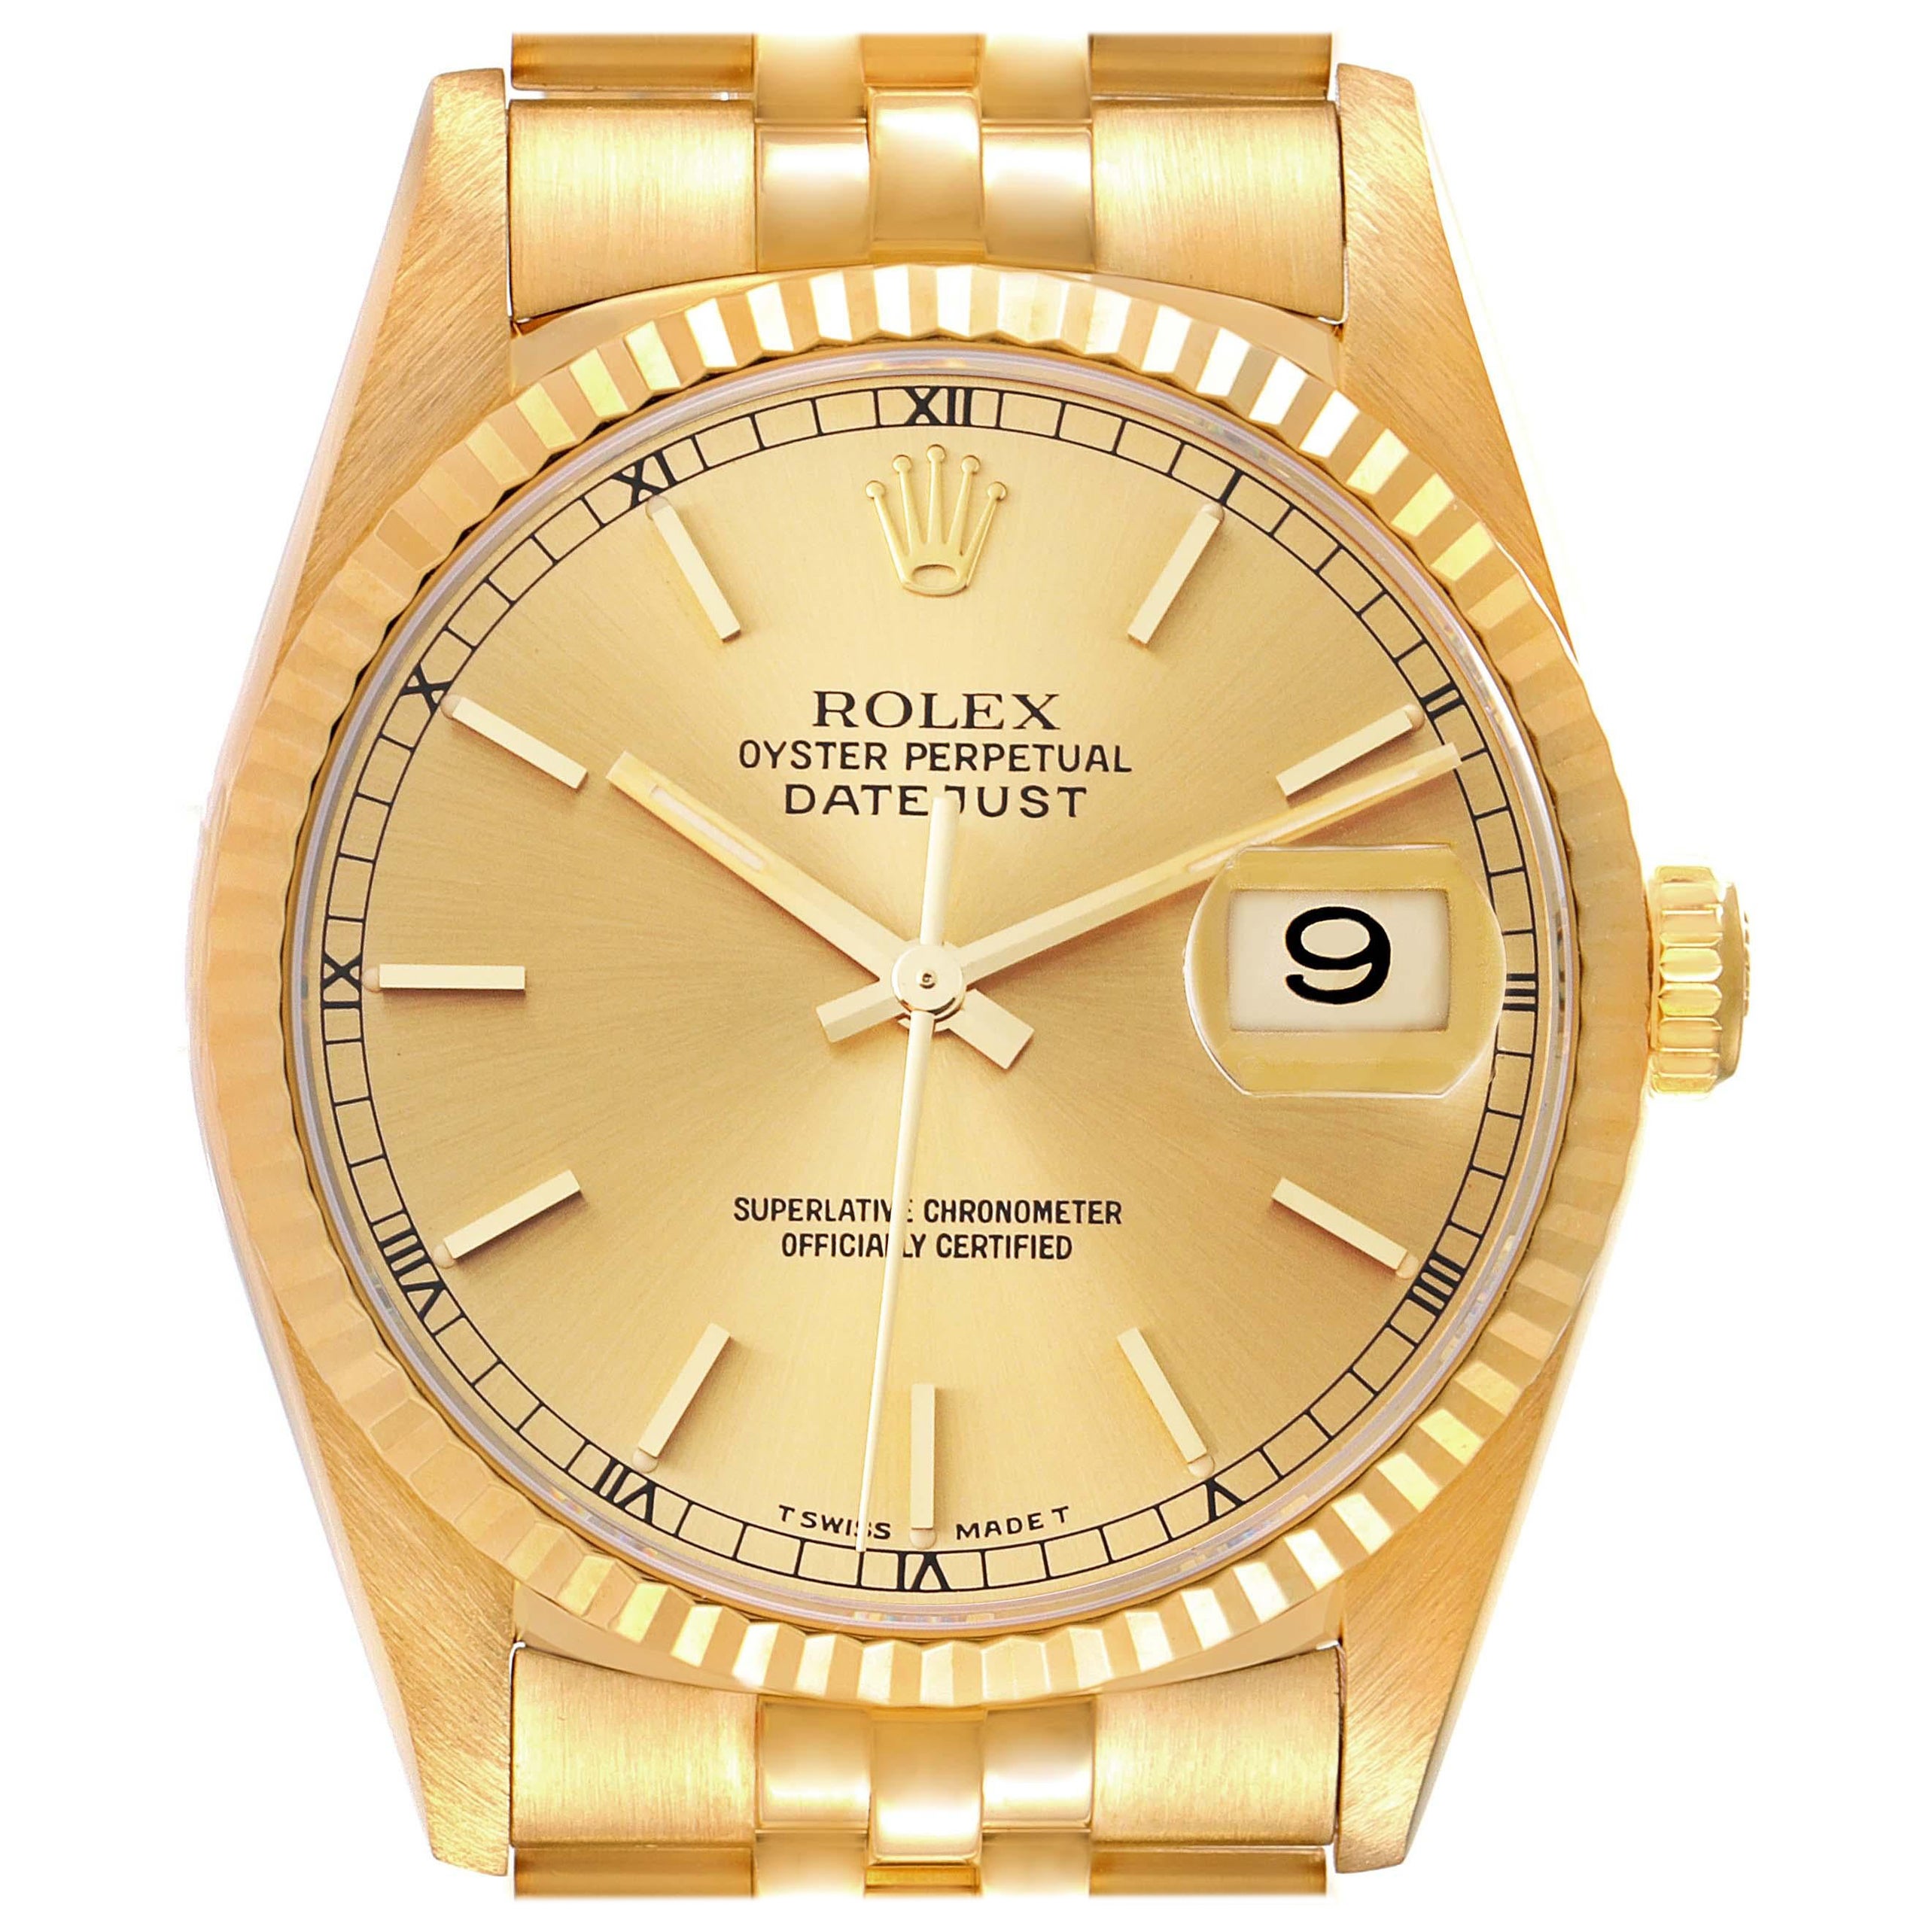 Rolex Datejust 18k Yellow Gold Champagne Dial Mens Watch 16238